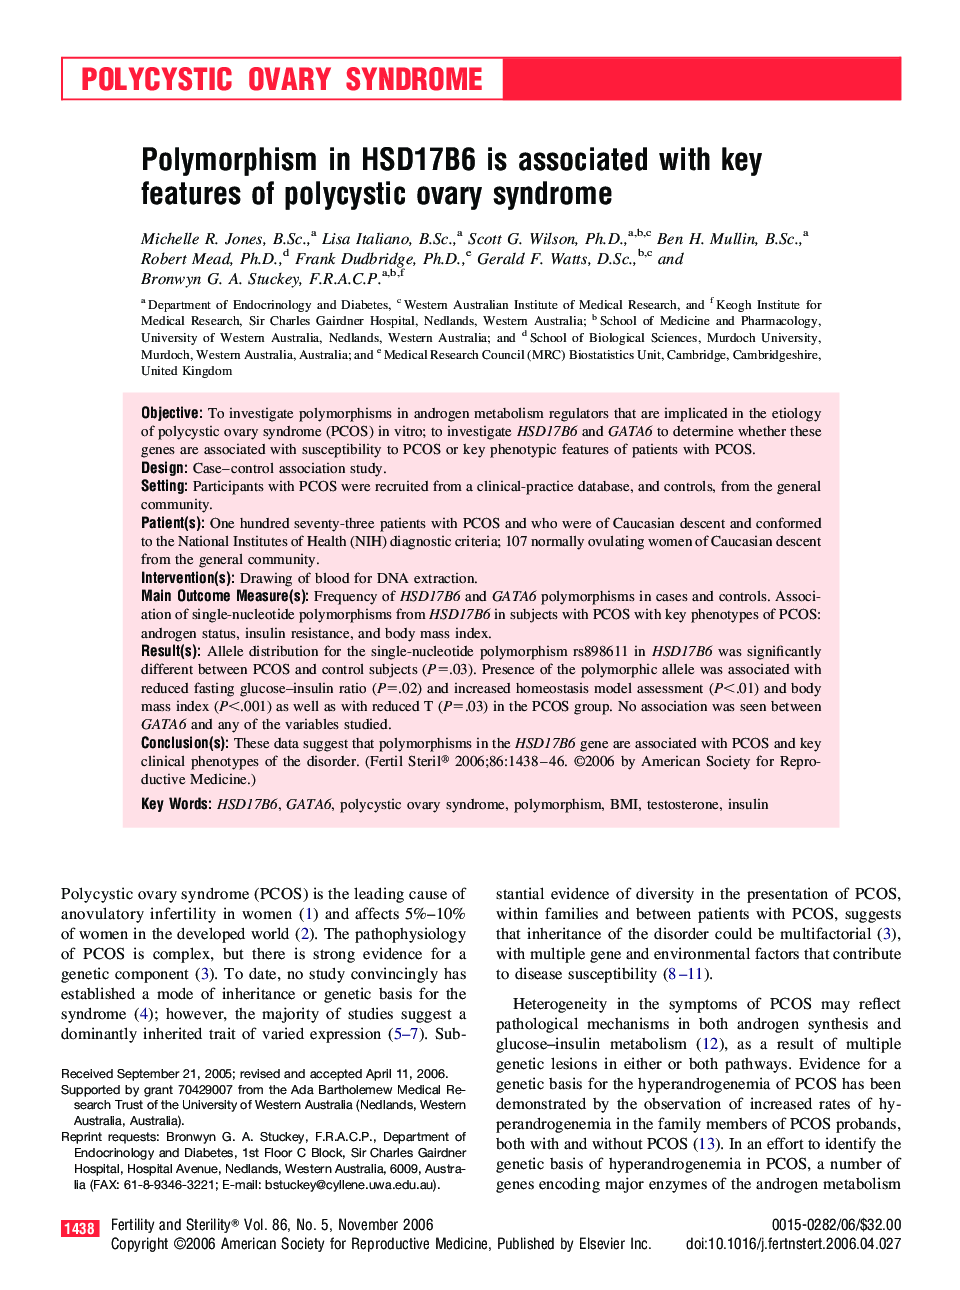 Polymorphism in HSD17B6 is associated with key features of polycystic ovary syndrome 